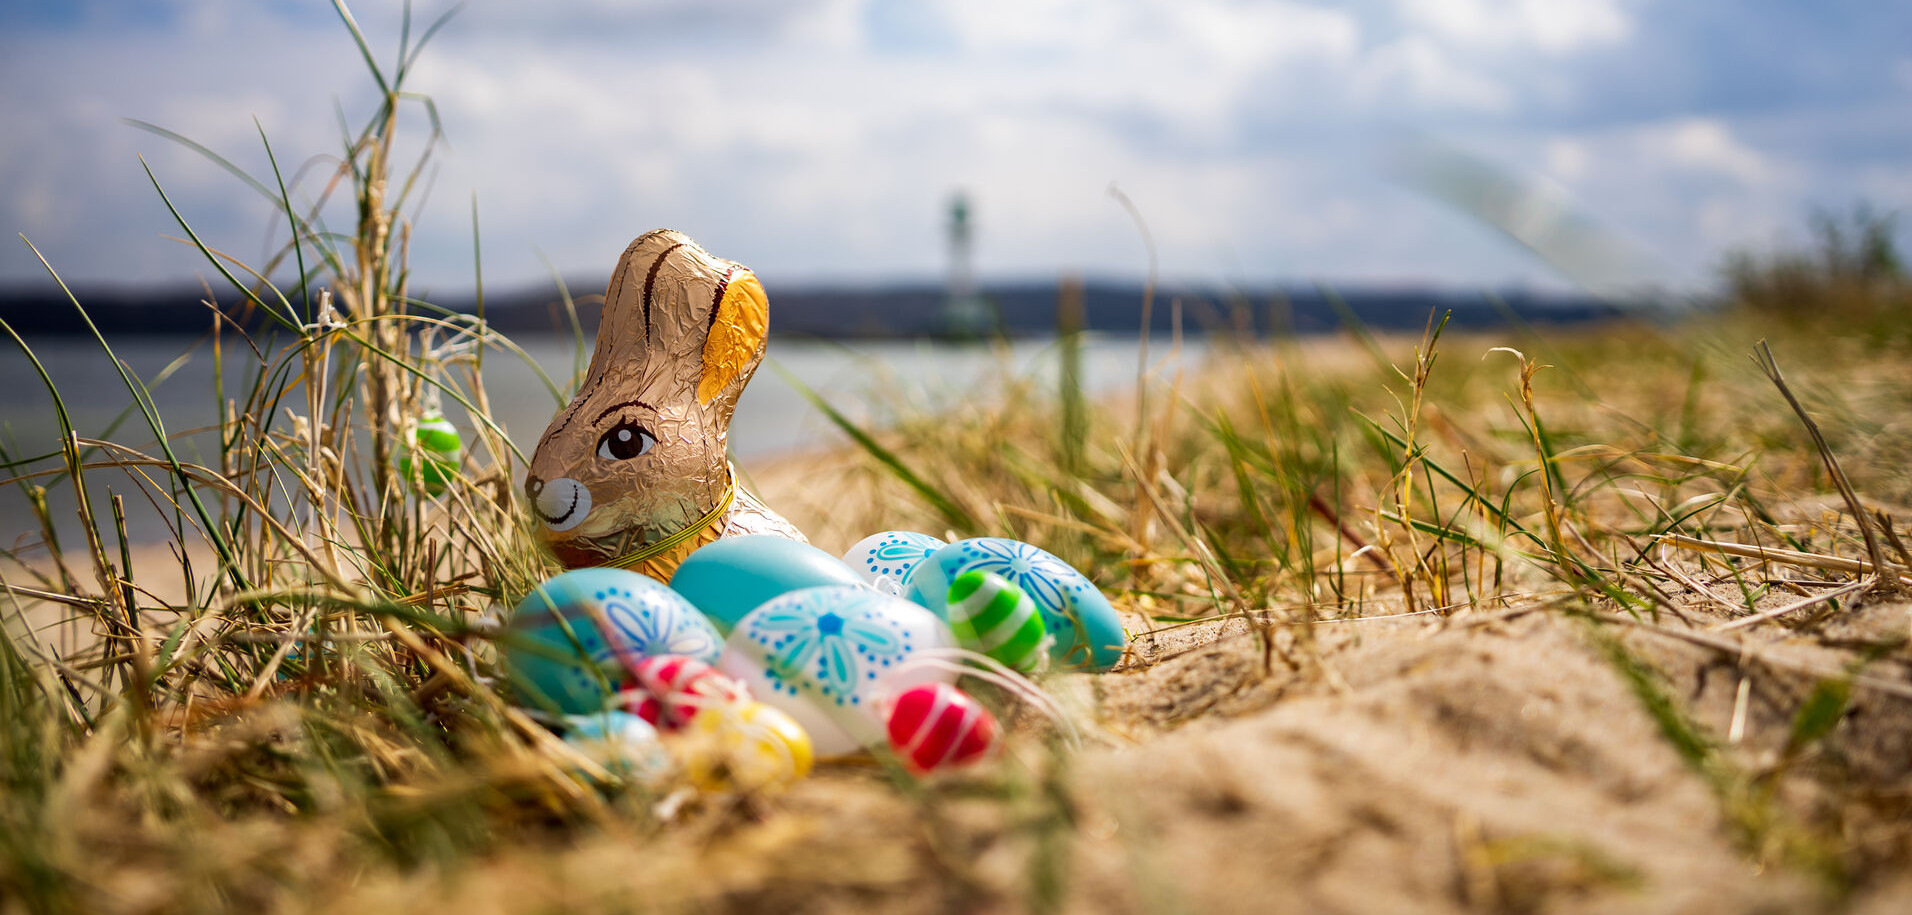  Would you like to give your loved ones a little treat for Easter? Here you will find maritime gift ideas from the region.